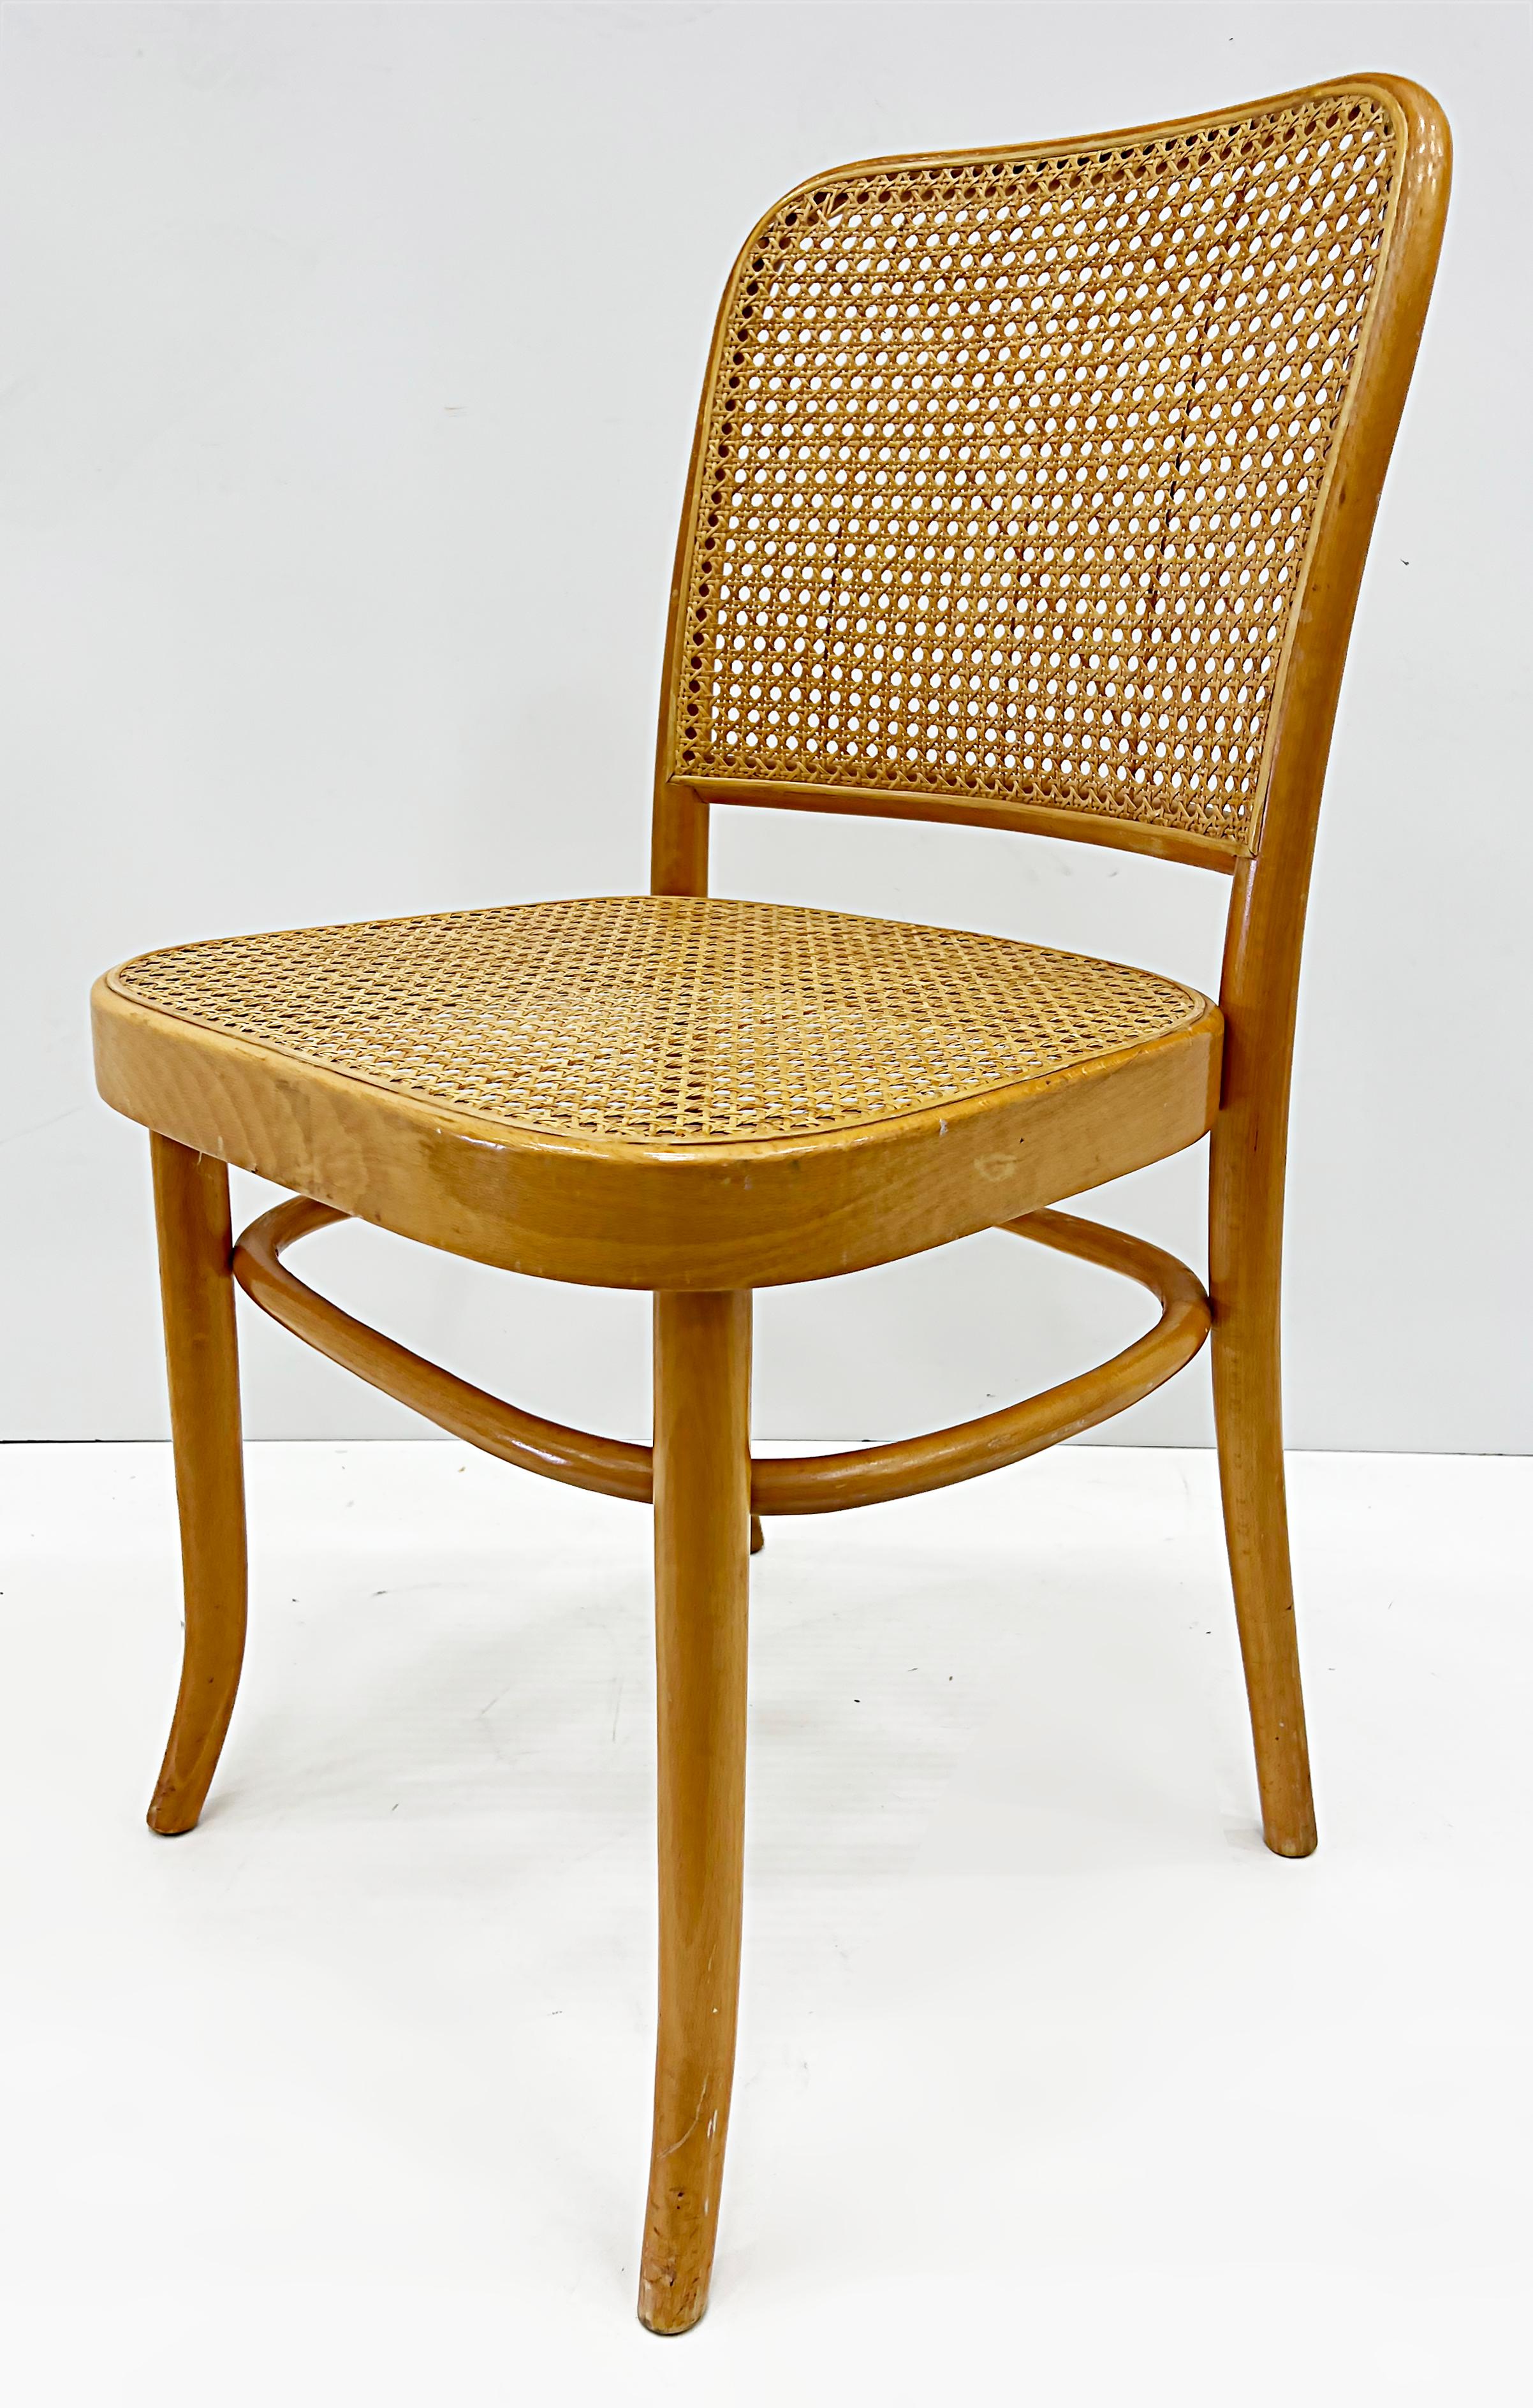 Salvatore Leone Vintage Bentwood Caned Chairs, Thonet Style For Sale 4